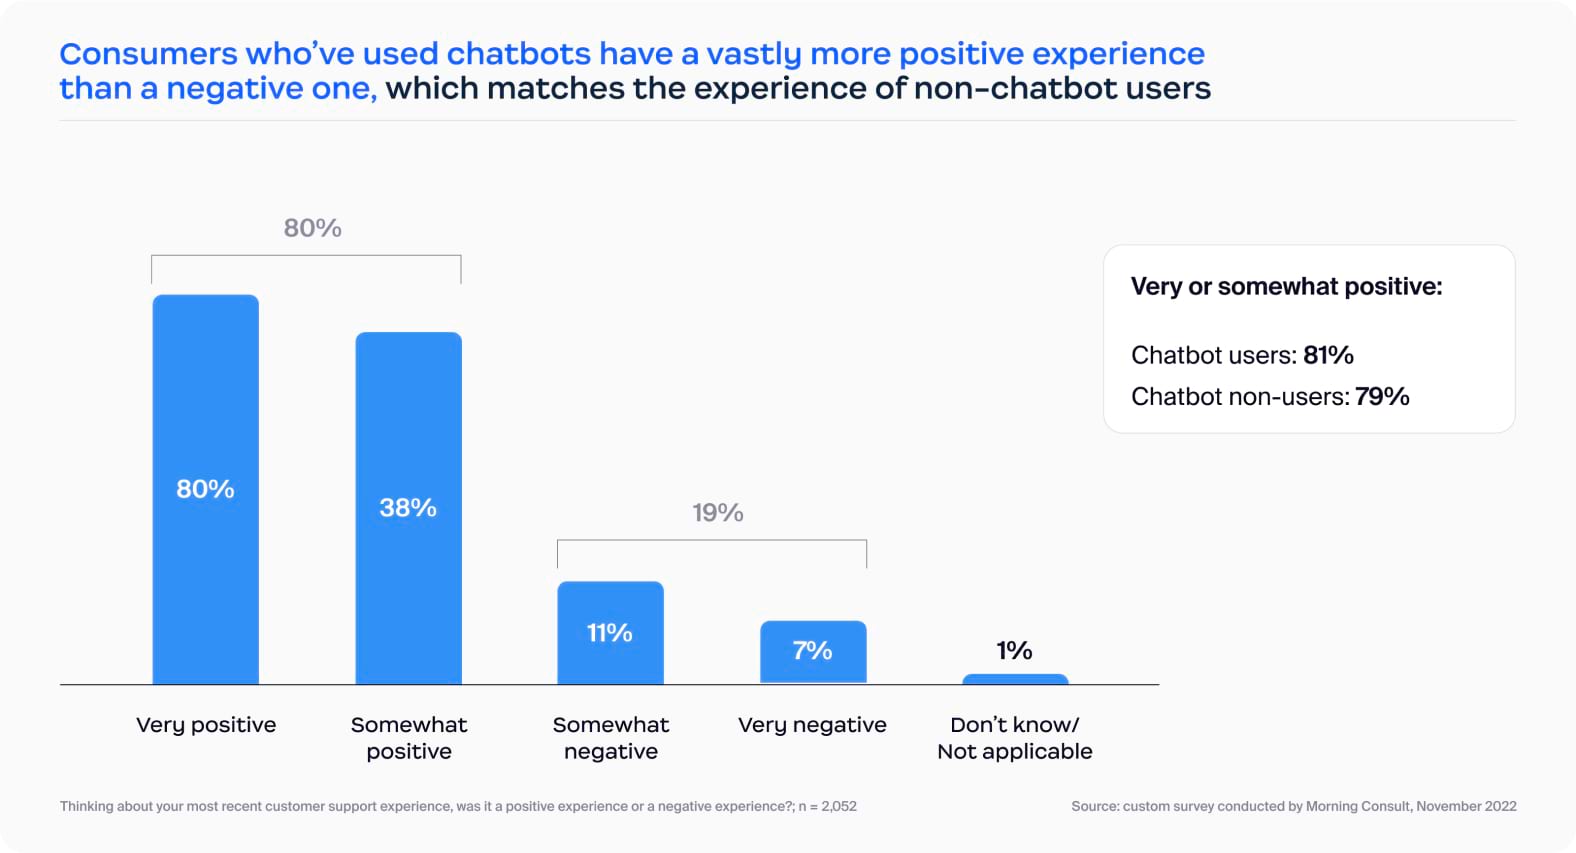 Consumers who've used chatbots have a vastly more positive experience 